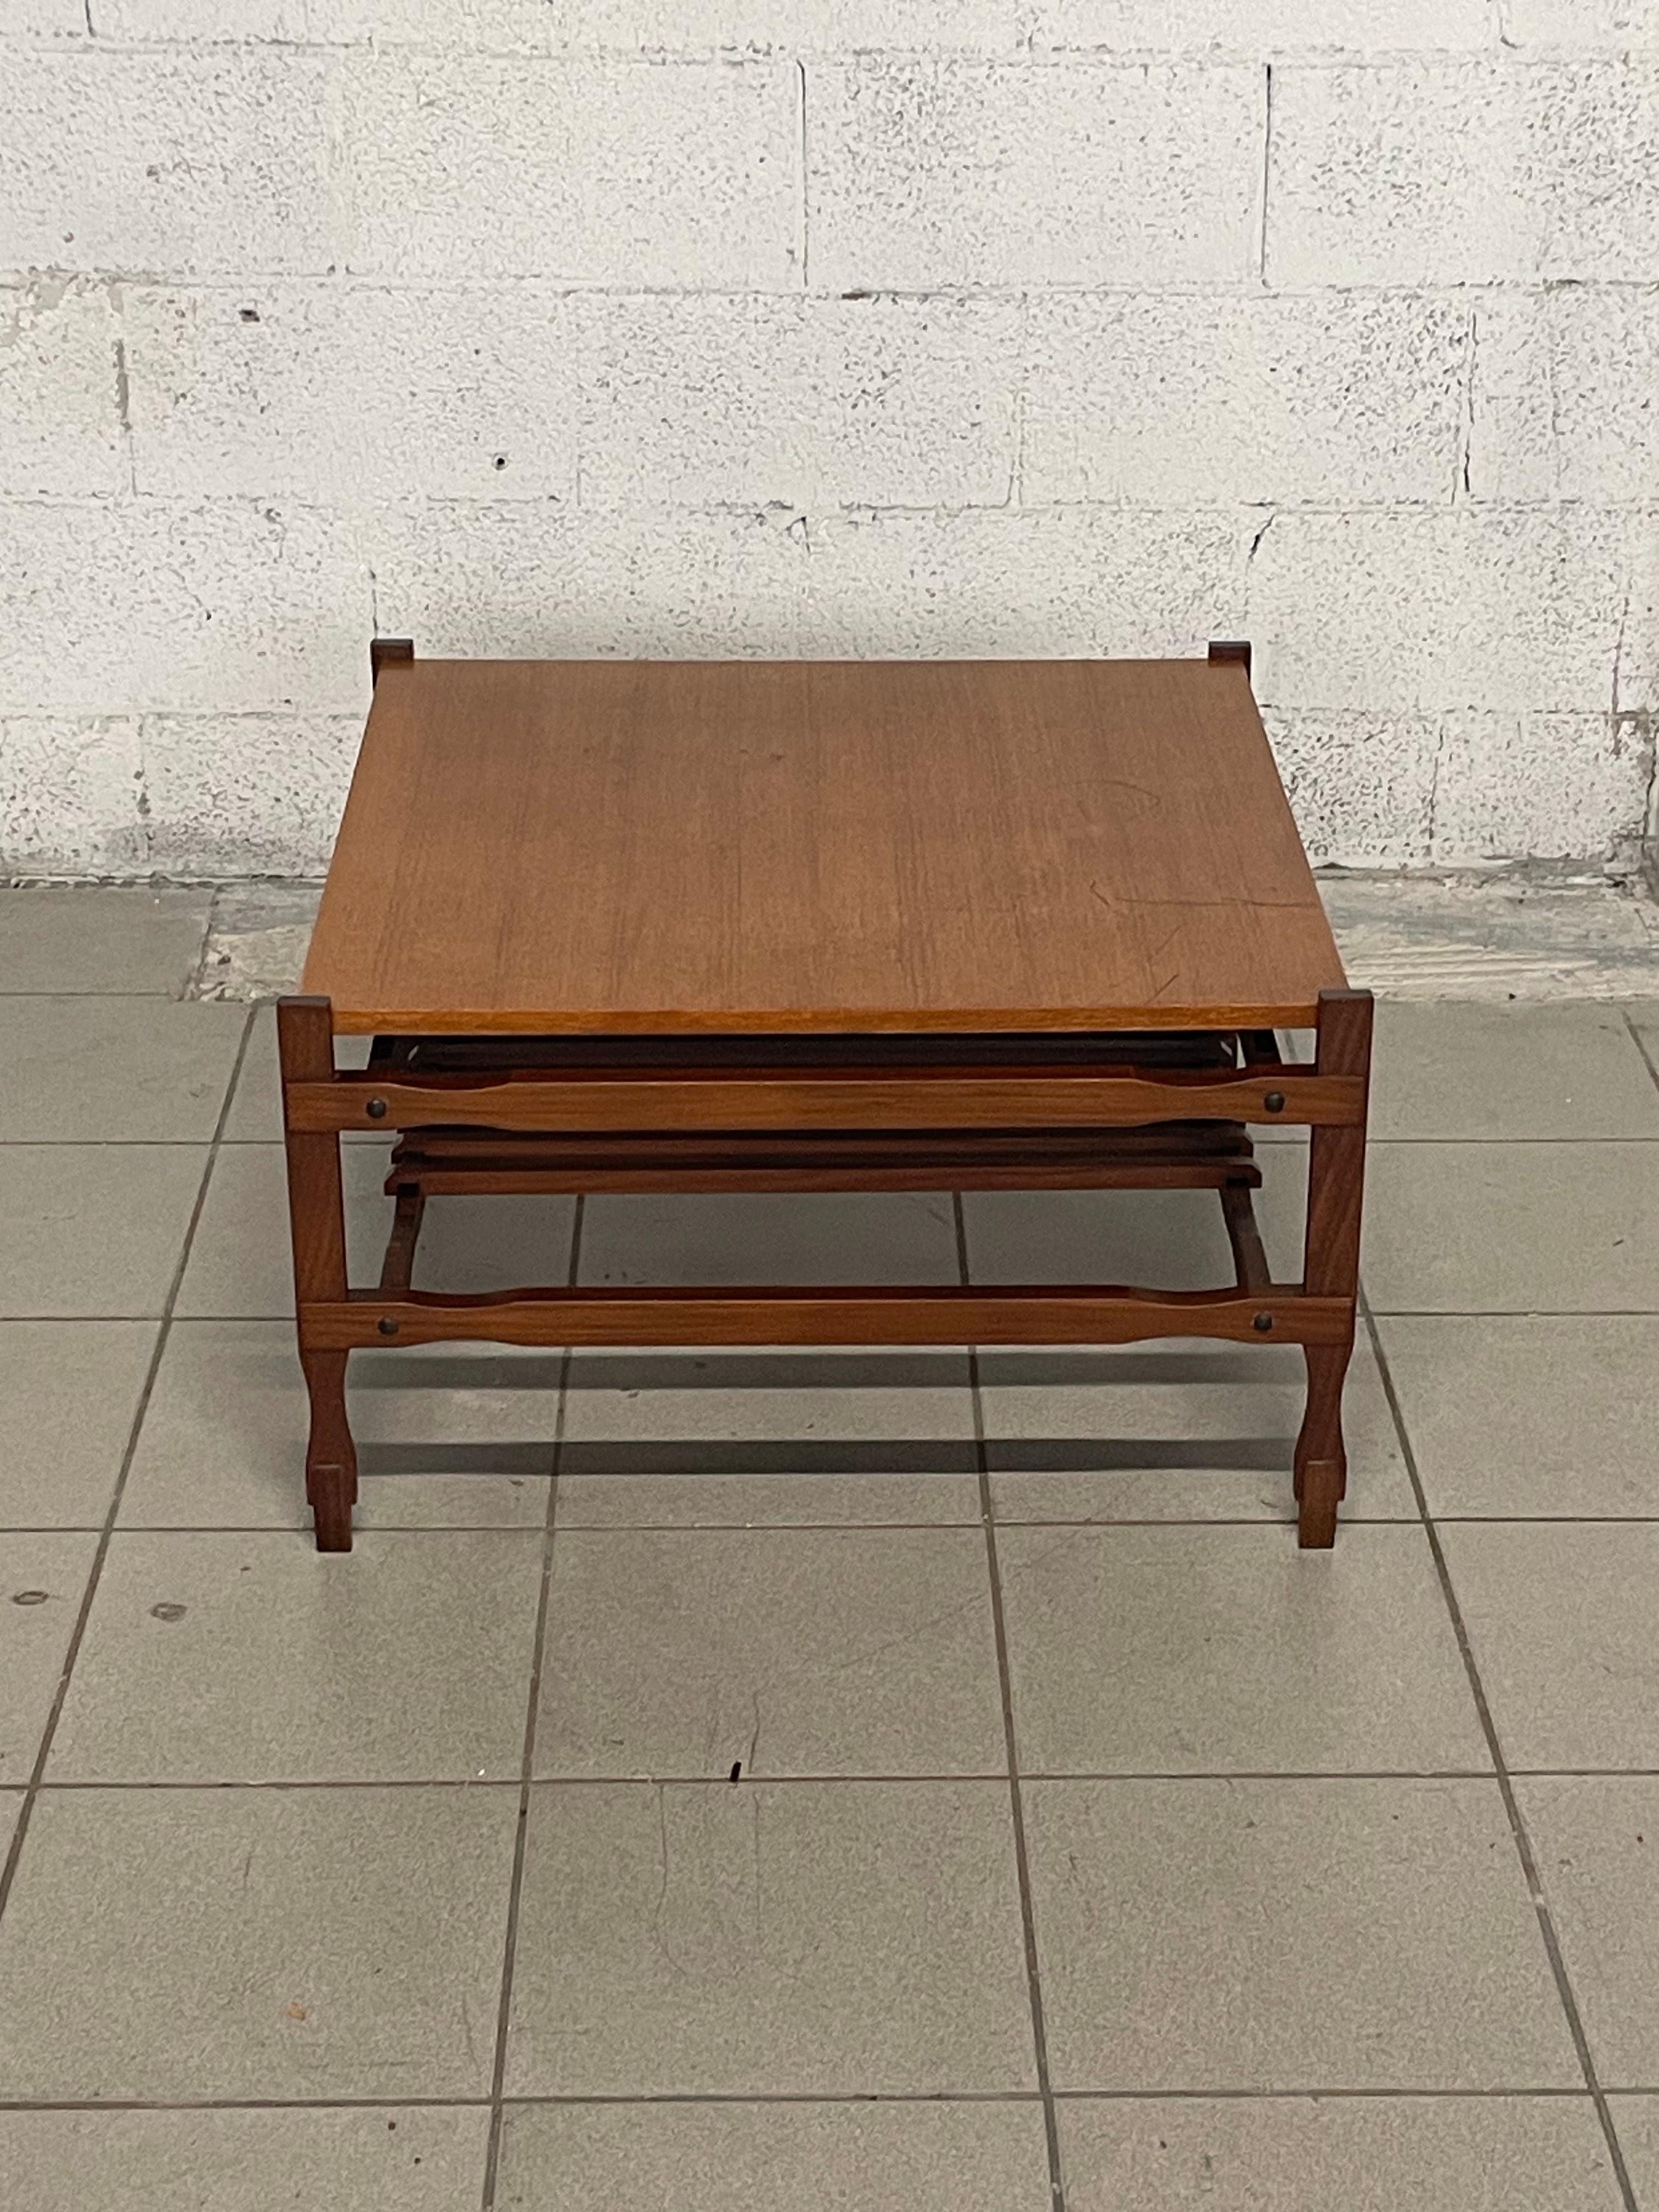 Teak coffee table from the 1960s.

The slatted structure characterizes this side table in its side parts and the shelf underneath, which can also be used as a magazine rack.

The coffee table is in excellent condition.